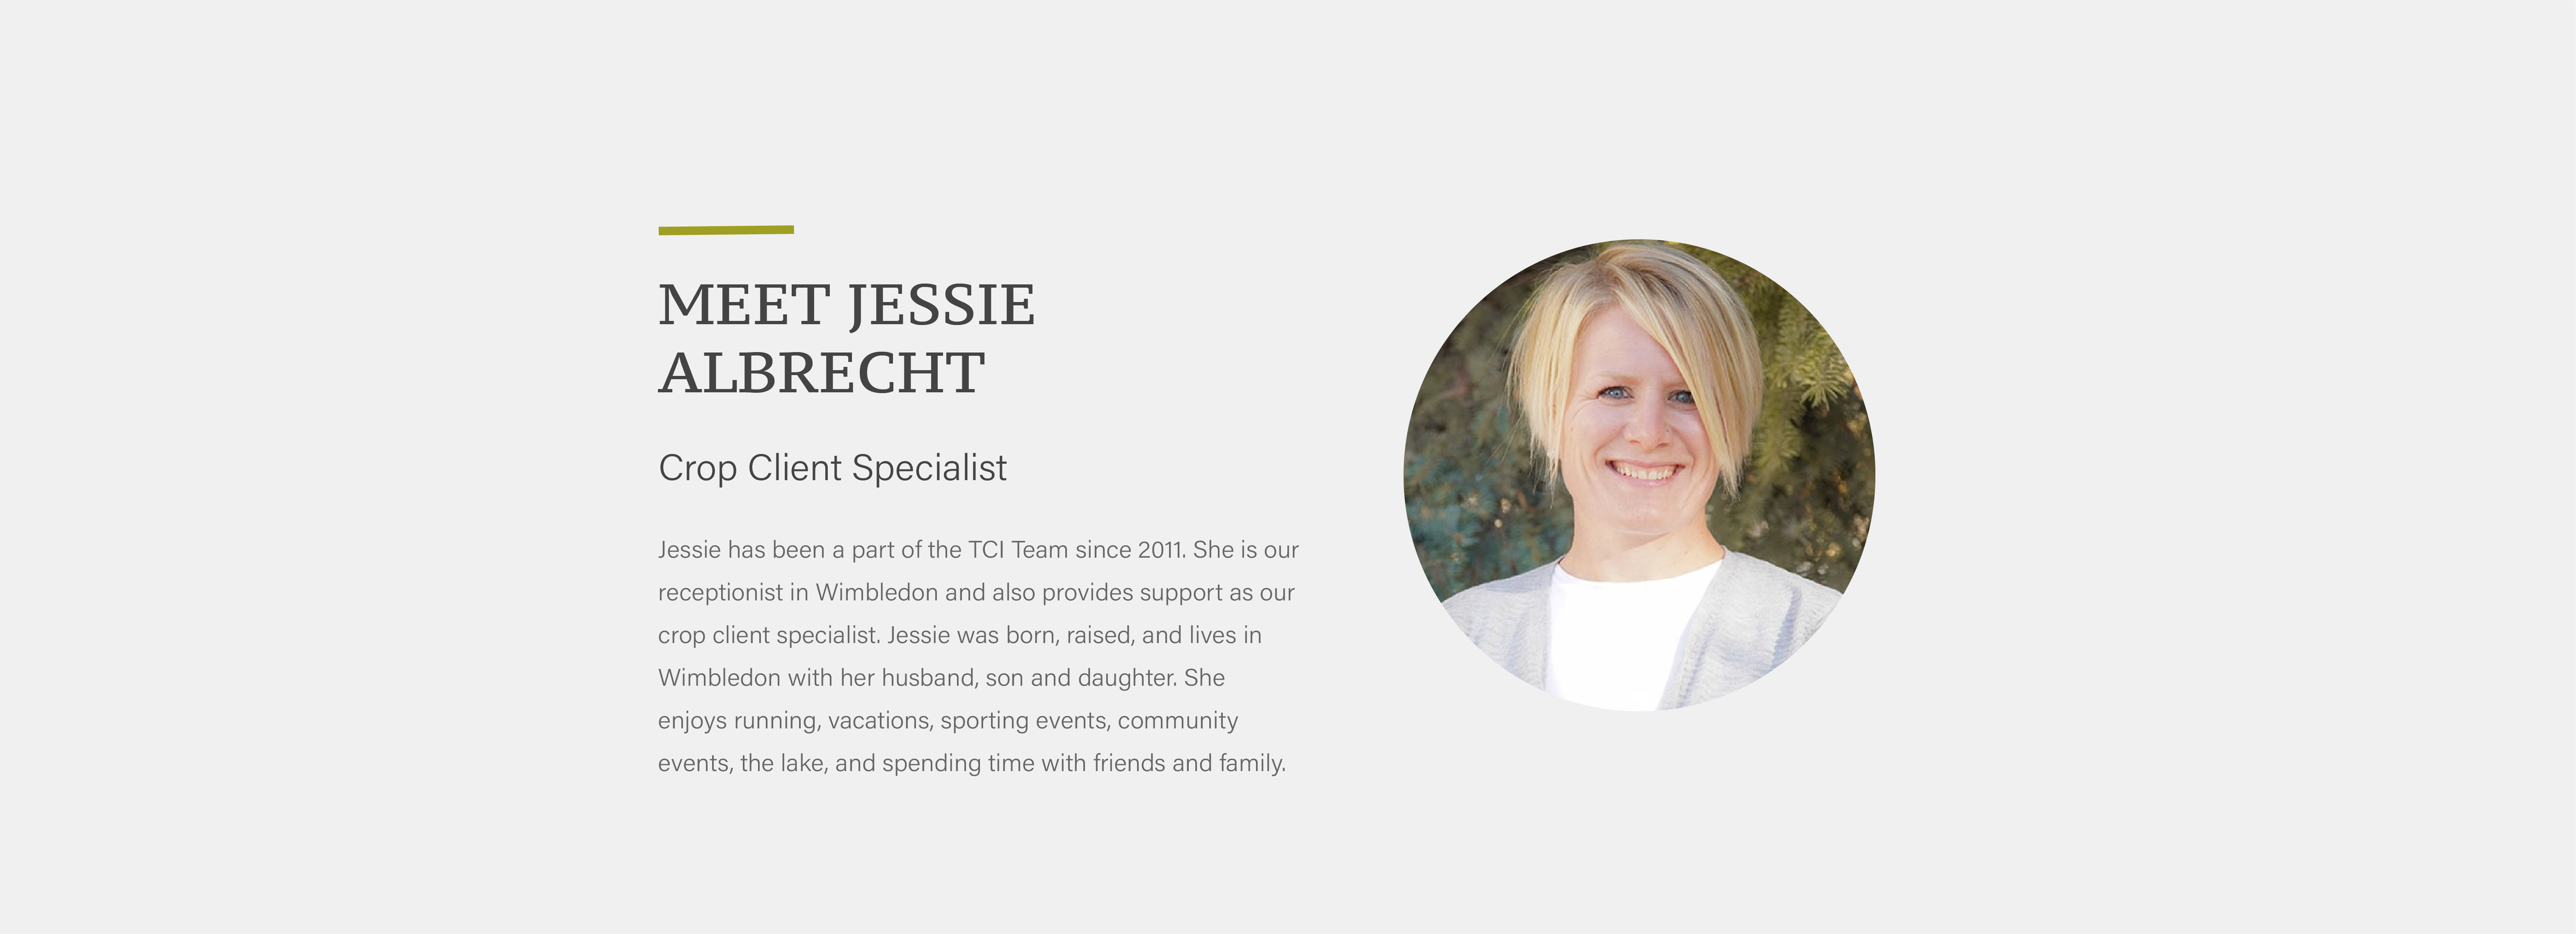 Jessie has been a part of the TCI Team since 2011. She is our receptionist in Wimbledon and also provides support as our crop client specialist. Jessie was born, raised, and lives in Wimbledon with her husband, son and daughter. She enjoys running, vacations, sporting events, community events, the lake, and spending time with friends and family.